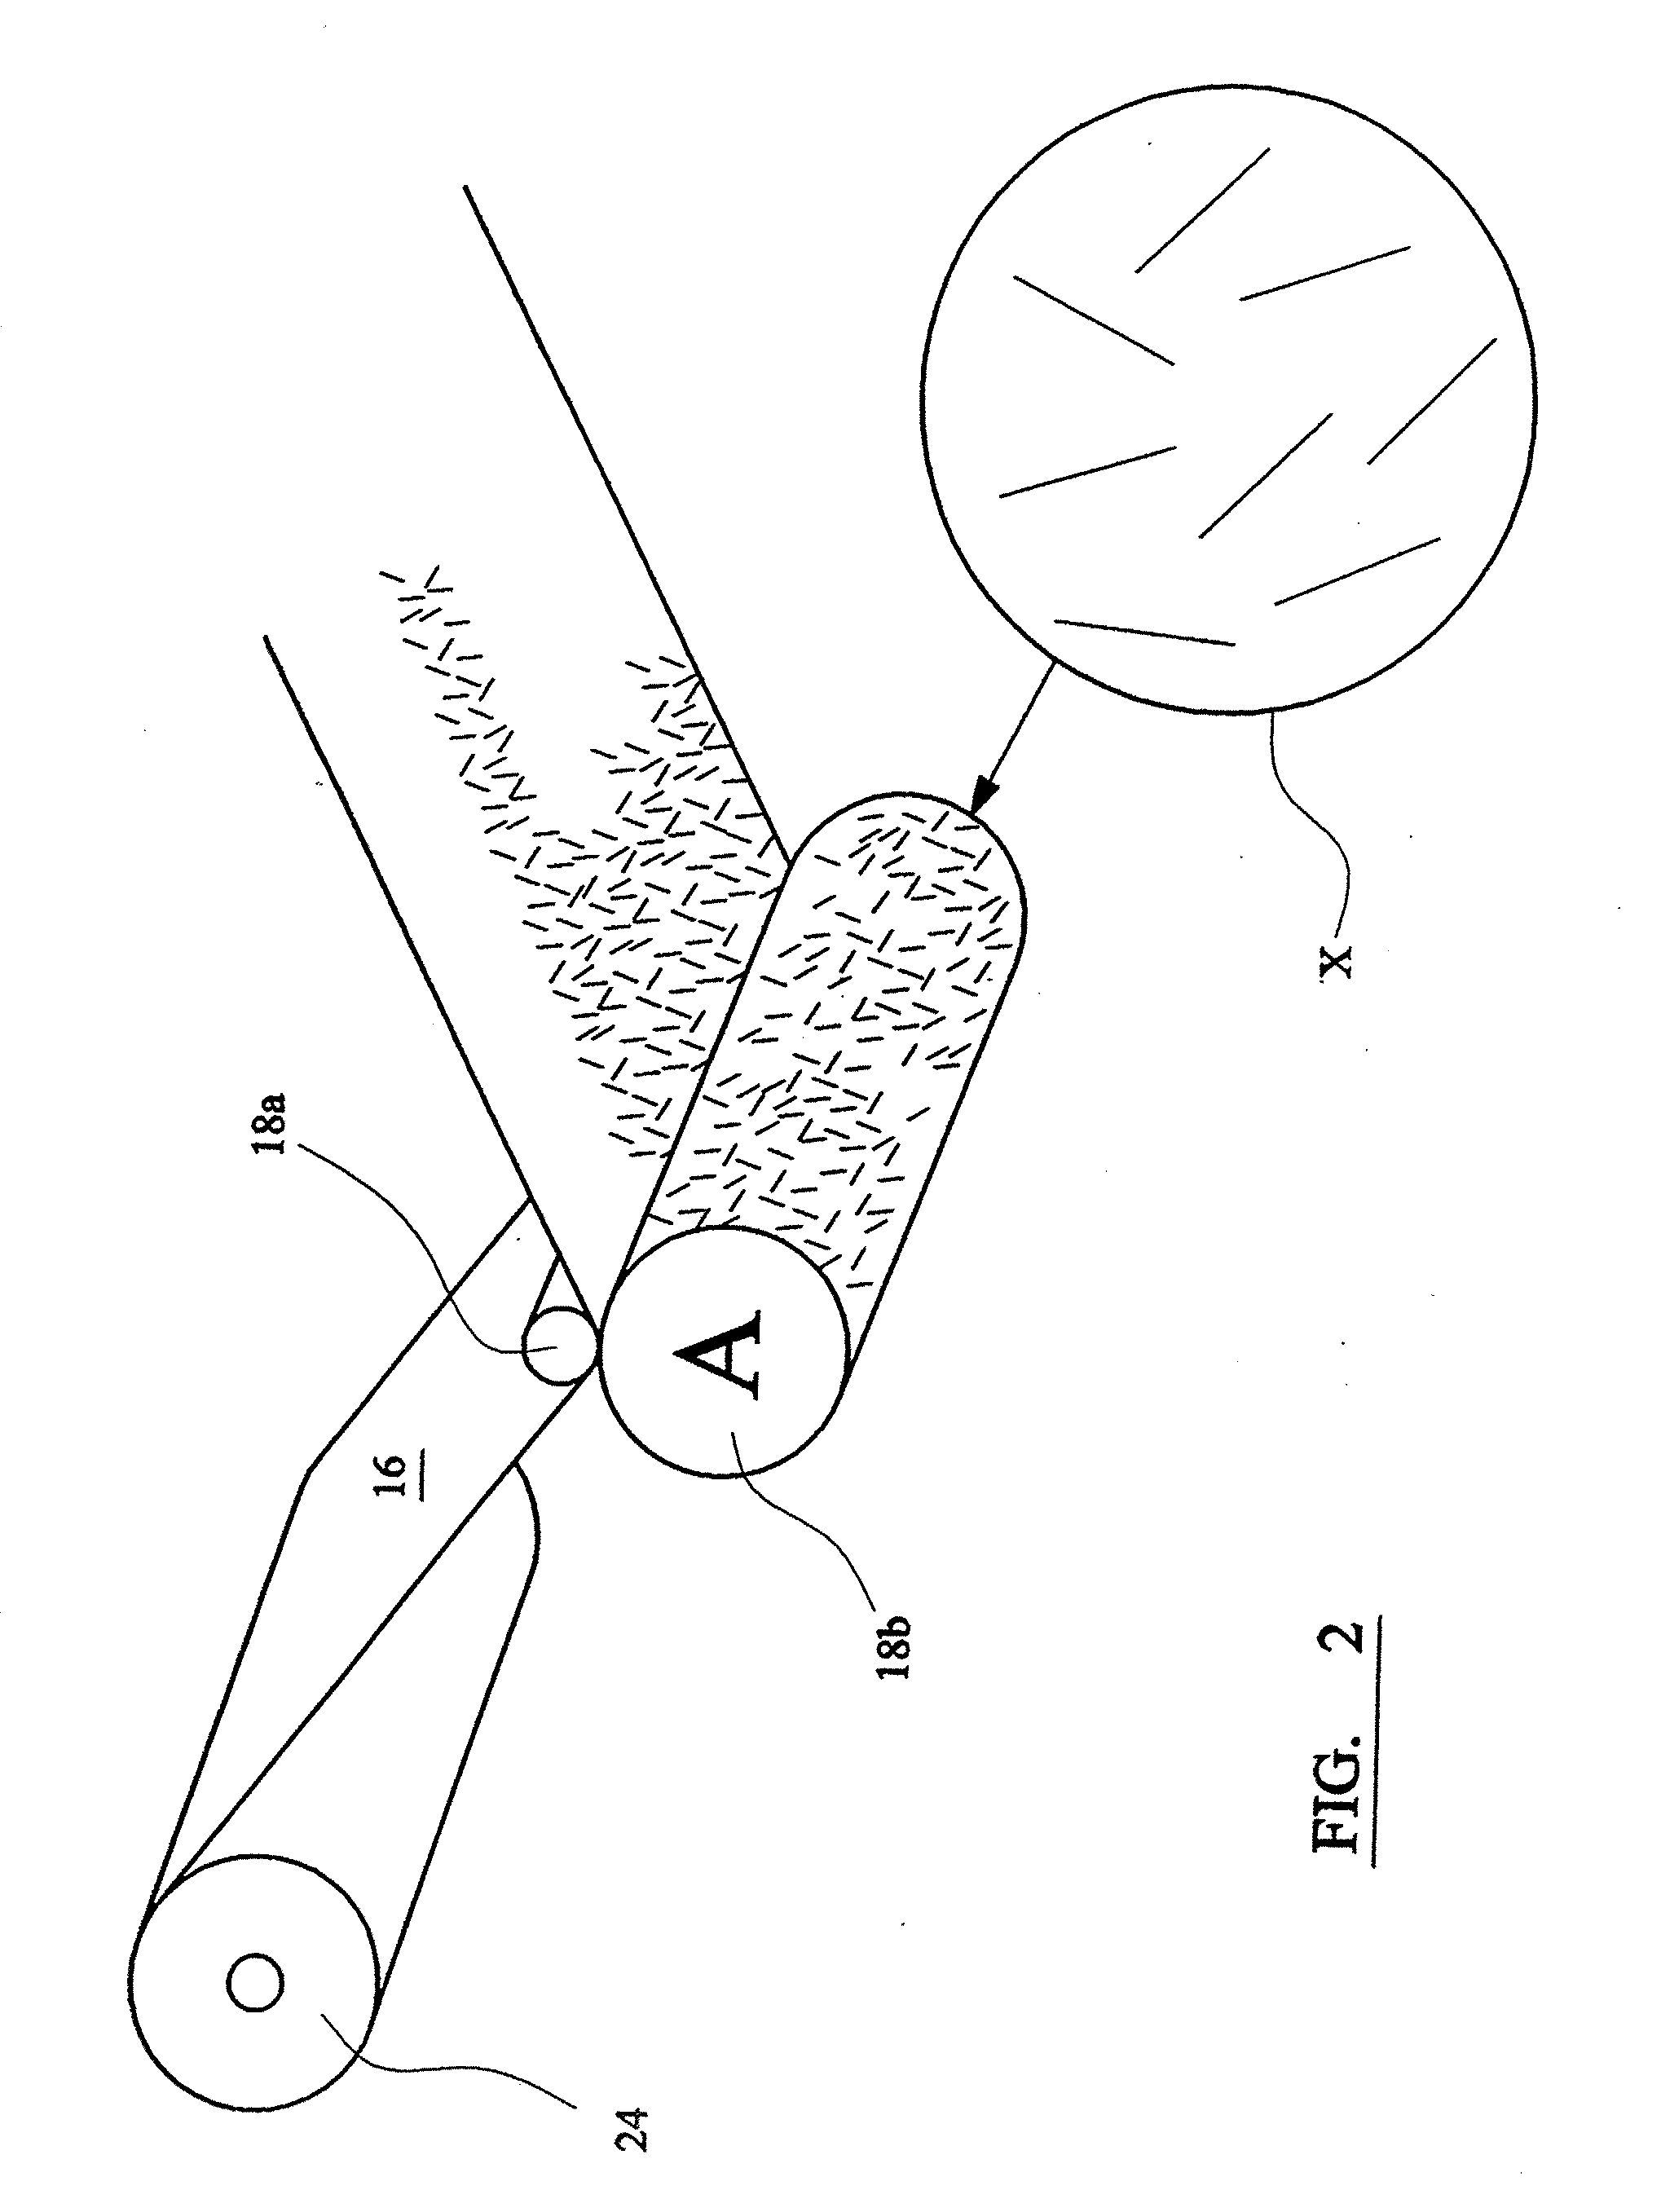 Method and Apparatus for Making Articles